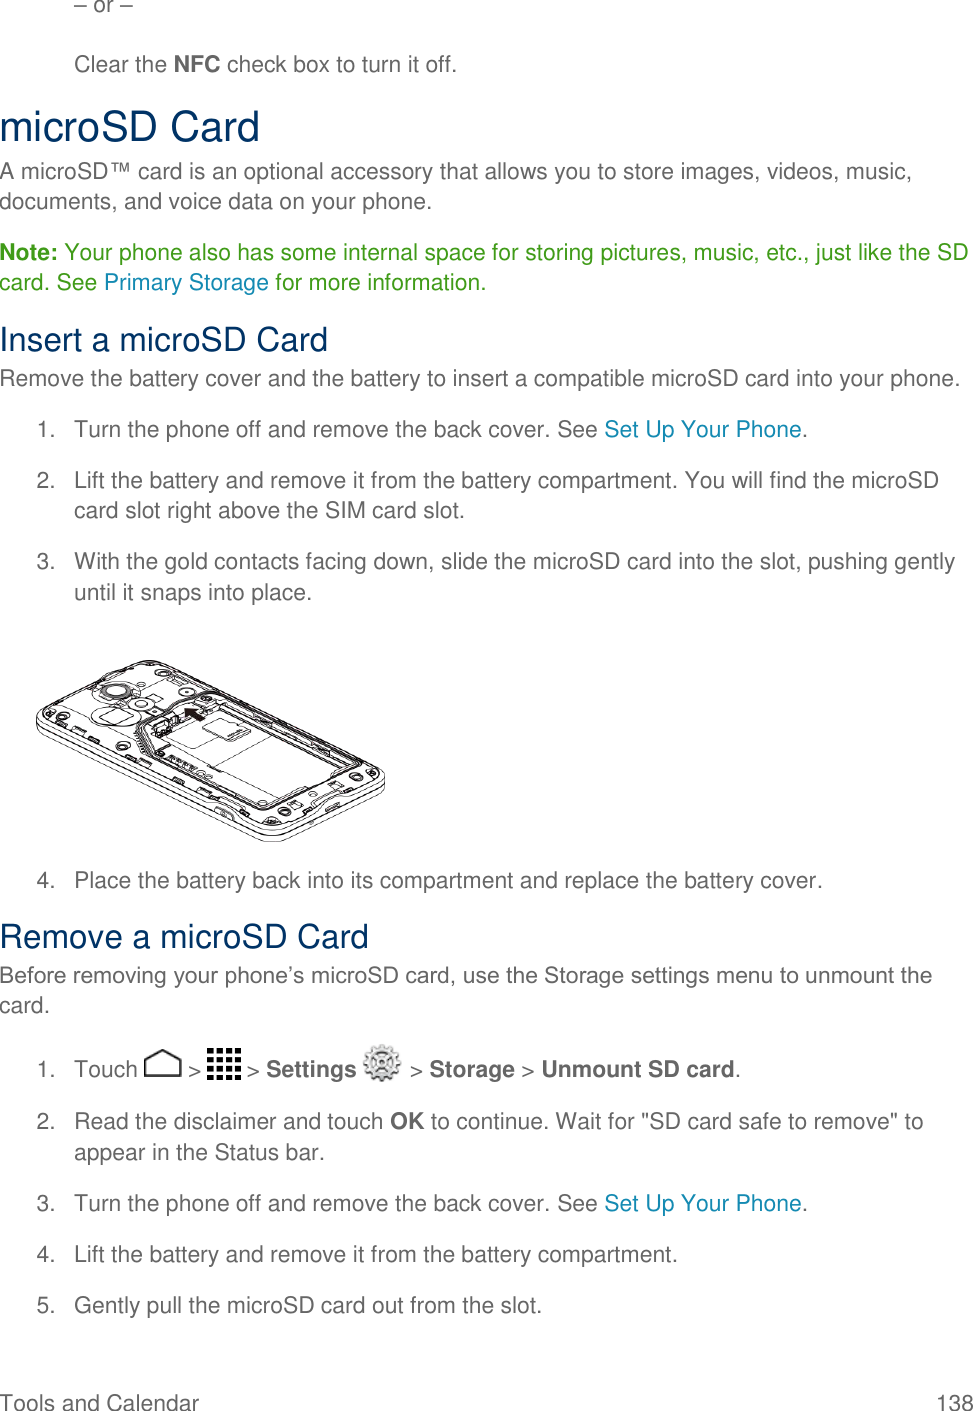 Tools and Calendar  138 – or –  Clear the NFC check box to turn it off. microSD Card A microSD™ card is an optional accessory that allows you to store images, videos, music, documents, and voice data on your phone. Note: Your phone also has some internal space for storing pictures, music, etc., just like the SD card. See Primary Storage for more information. Insert a microSD Card Remove the battery cover and the battery to insert a compatible microSD card into your phone. 1.  Turn the phone off and remove the back cover. See Set Up Your Phone. 2.  Lift the battery and remove it from the battery compartment. You will find the microSD card slot right above the SIM card slot. 3.  With the gold contacts facing down, slide the microSD card into the slot, pushing gently until it snaps into place.     4.  Place the battery back into its compartment and replace the battery cover. Remove a microSD Card Before removing your phone’s microSD card, use the Storage settings menu to unmount the card. 1.  Touch   &gt;   &gt; Settings   &gt; Storage &gt; Unmount SD card. 2.  Read the disclaimer and touch OK to continue. Wait for &quot;SD card safe to remove&quot; to appear in the Status bar. 3.  Turn the phone off and remove the back cover. See Set Up Your Phone. 4.  Lift the battery and remove it from the battery compartment. 5.  Gently pull the microSD card out from the slot. 